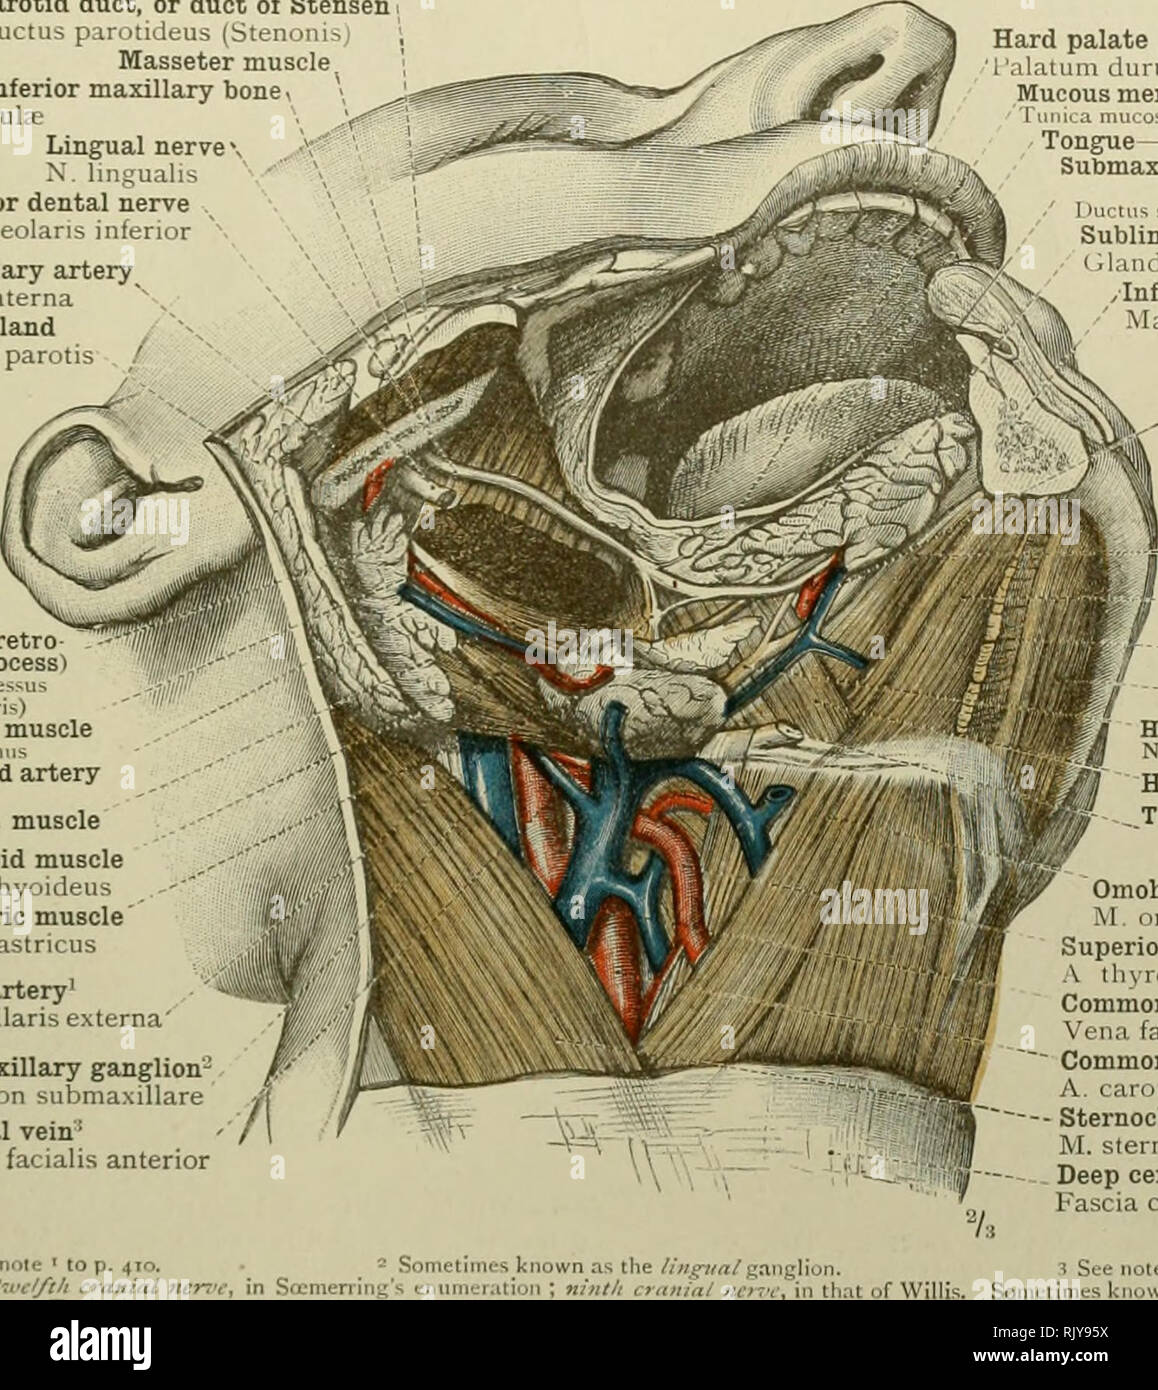 . An atlas of human anatomy for students and physicians. Anatomy. CEPHALIC AND CERVICAL PORTIONS OF THE DIGESTIVE ORGANS 425 Parotid duct, or duct of Stensen Ductus parotidcu^ (Sttn Masseter muscle. Ramus of the inferior maxillary bone Ramus mandibula;- Lingual nerve- N. liiigualis Inferior dental nerve N. alveolaris inferior Internal maxillary artery A. maxillaris interna Parotid gland Glandula parotis ' Parotid gland (retro mandibular process) Gl. i.aroli (pr t^ us Internal pterygoid muscle M. ptcMsoideusint^rn External carotid artery A. caroliscN-tern.'i Styloglossus muscle Stylohyoid muscl Stock Photo